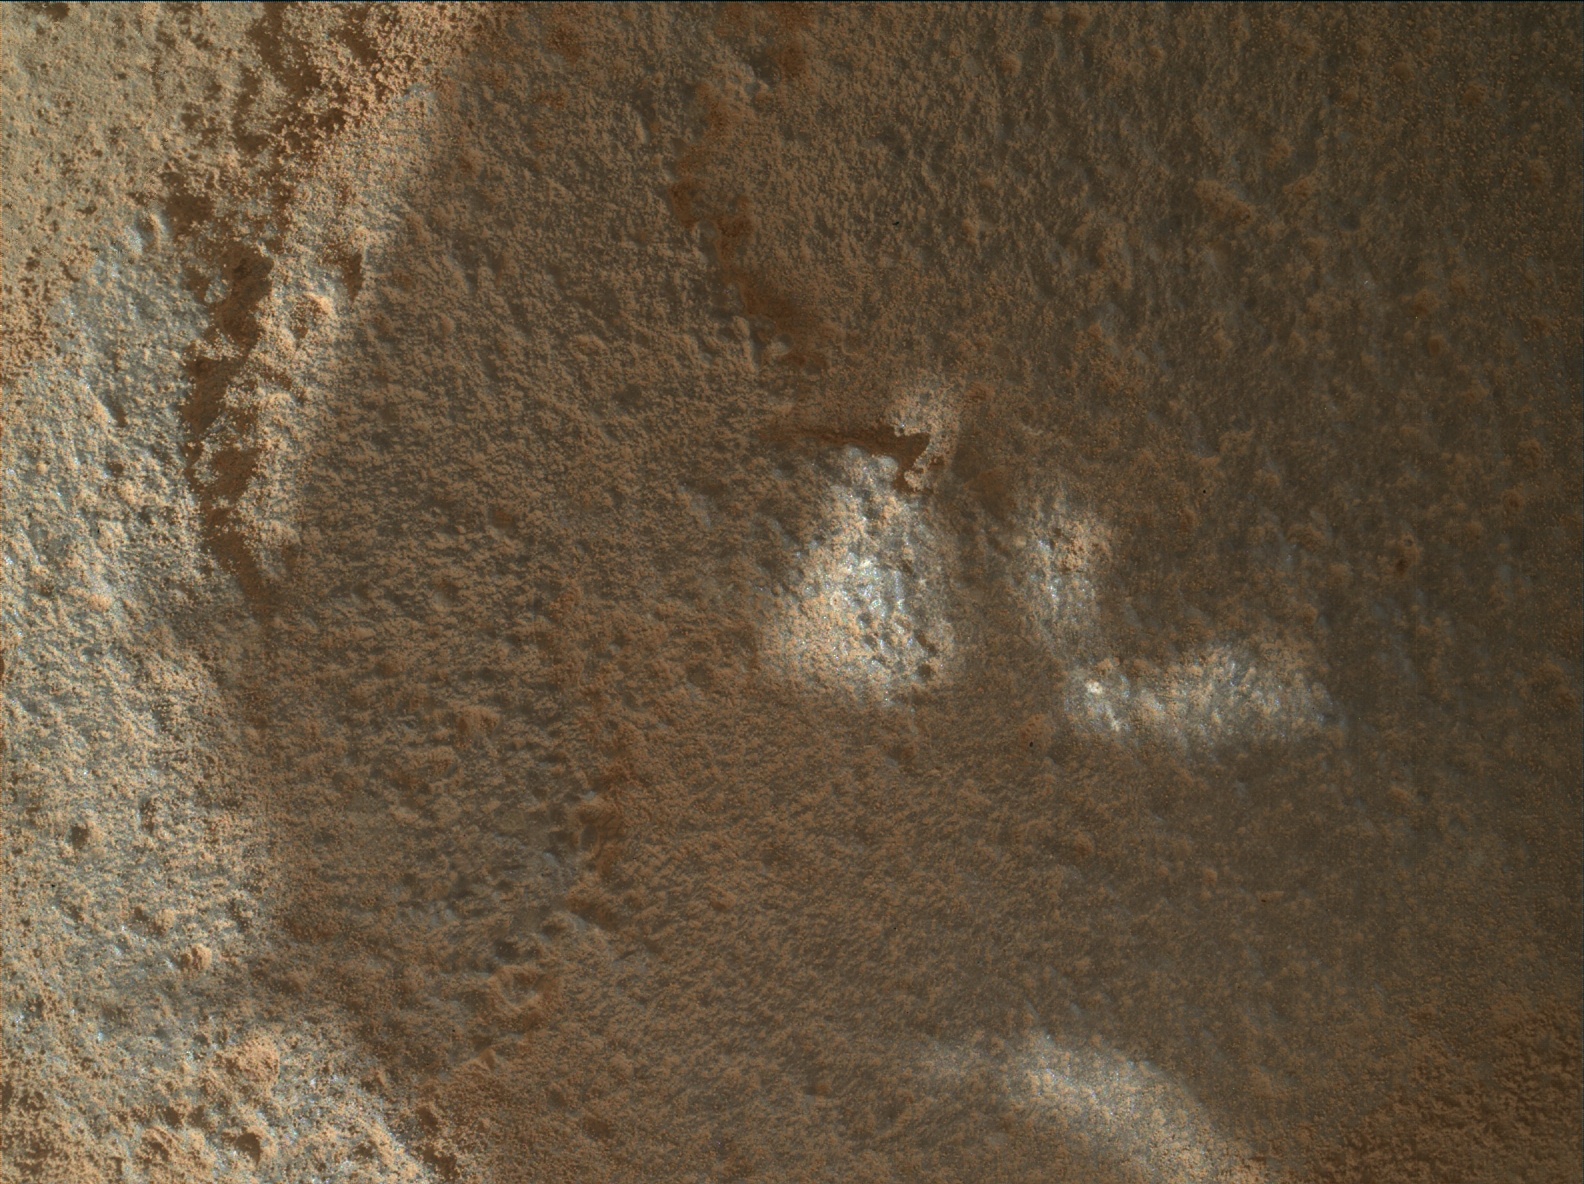 Nasa's Mars rover Curiosity acquired this image using its Mars Hand Lens Imager (MAHLI) on Sol 2707